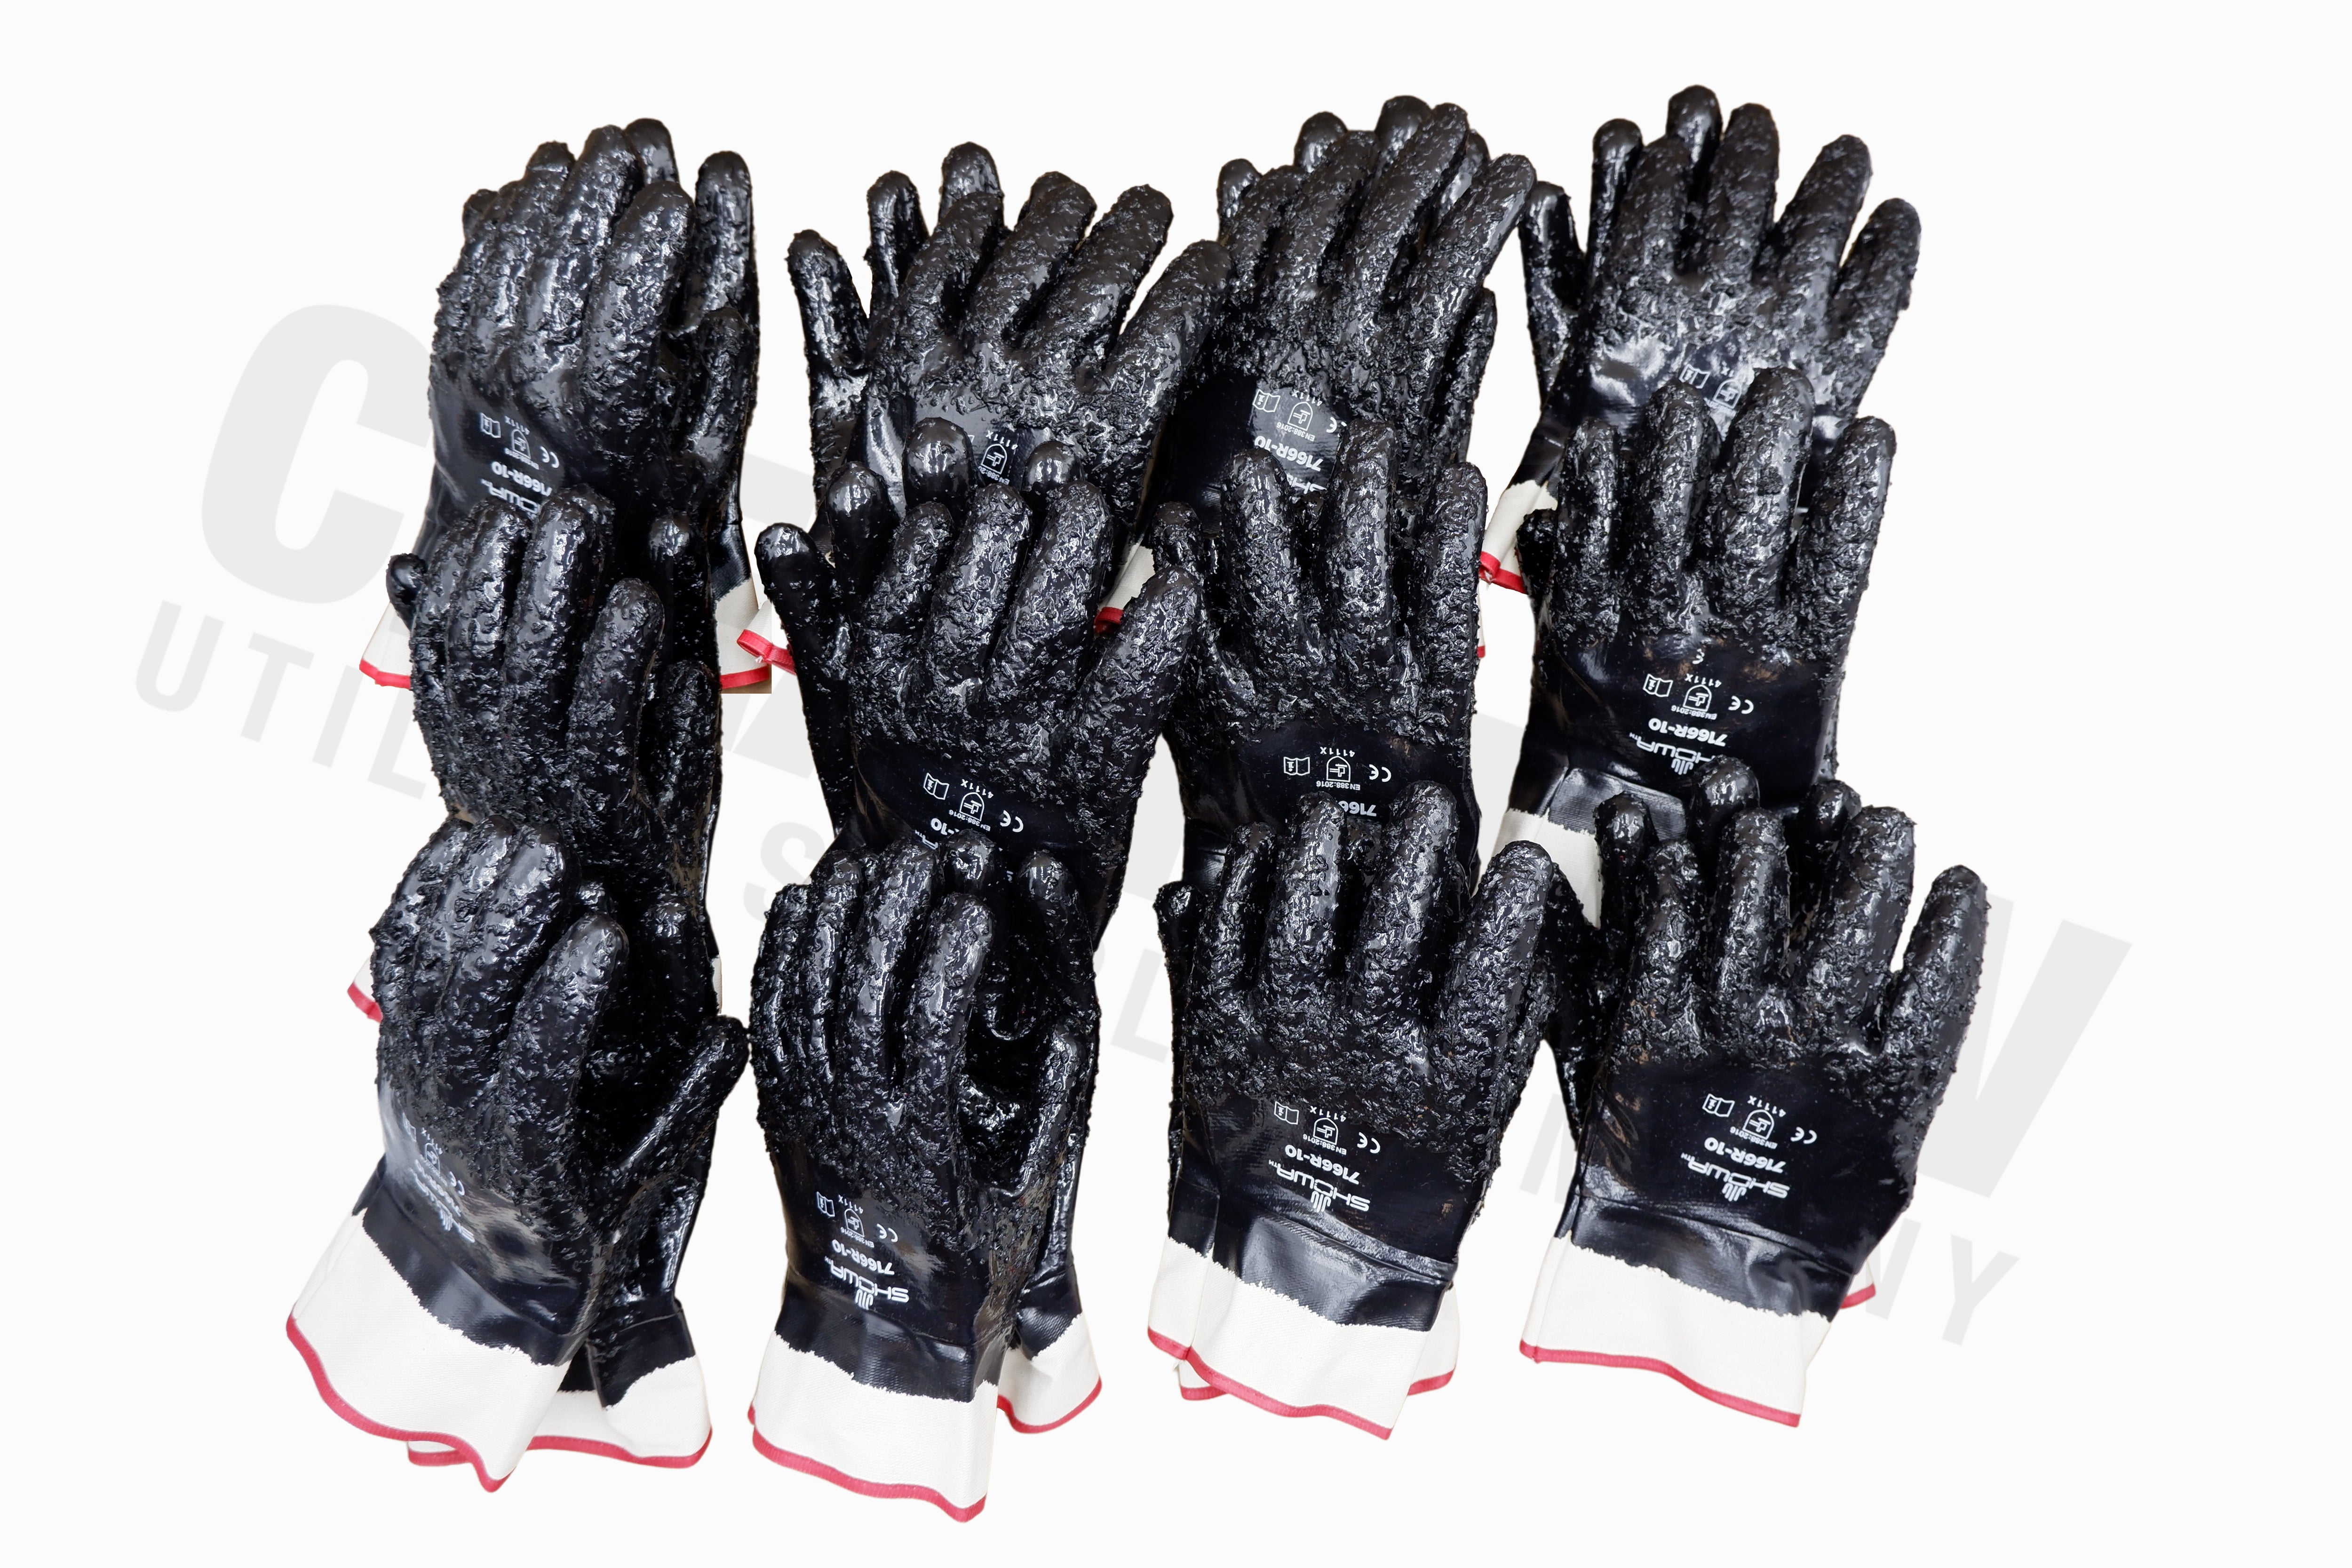 Showa 7166R Nitrile Coated Rough Grip Work Glove - Pack of 12 Pairs